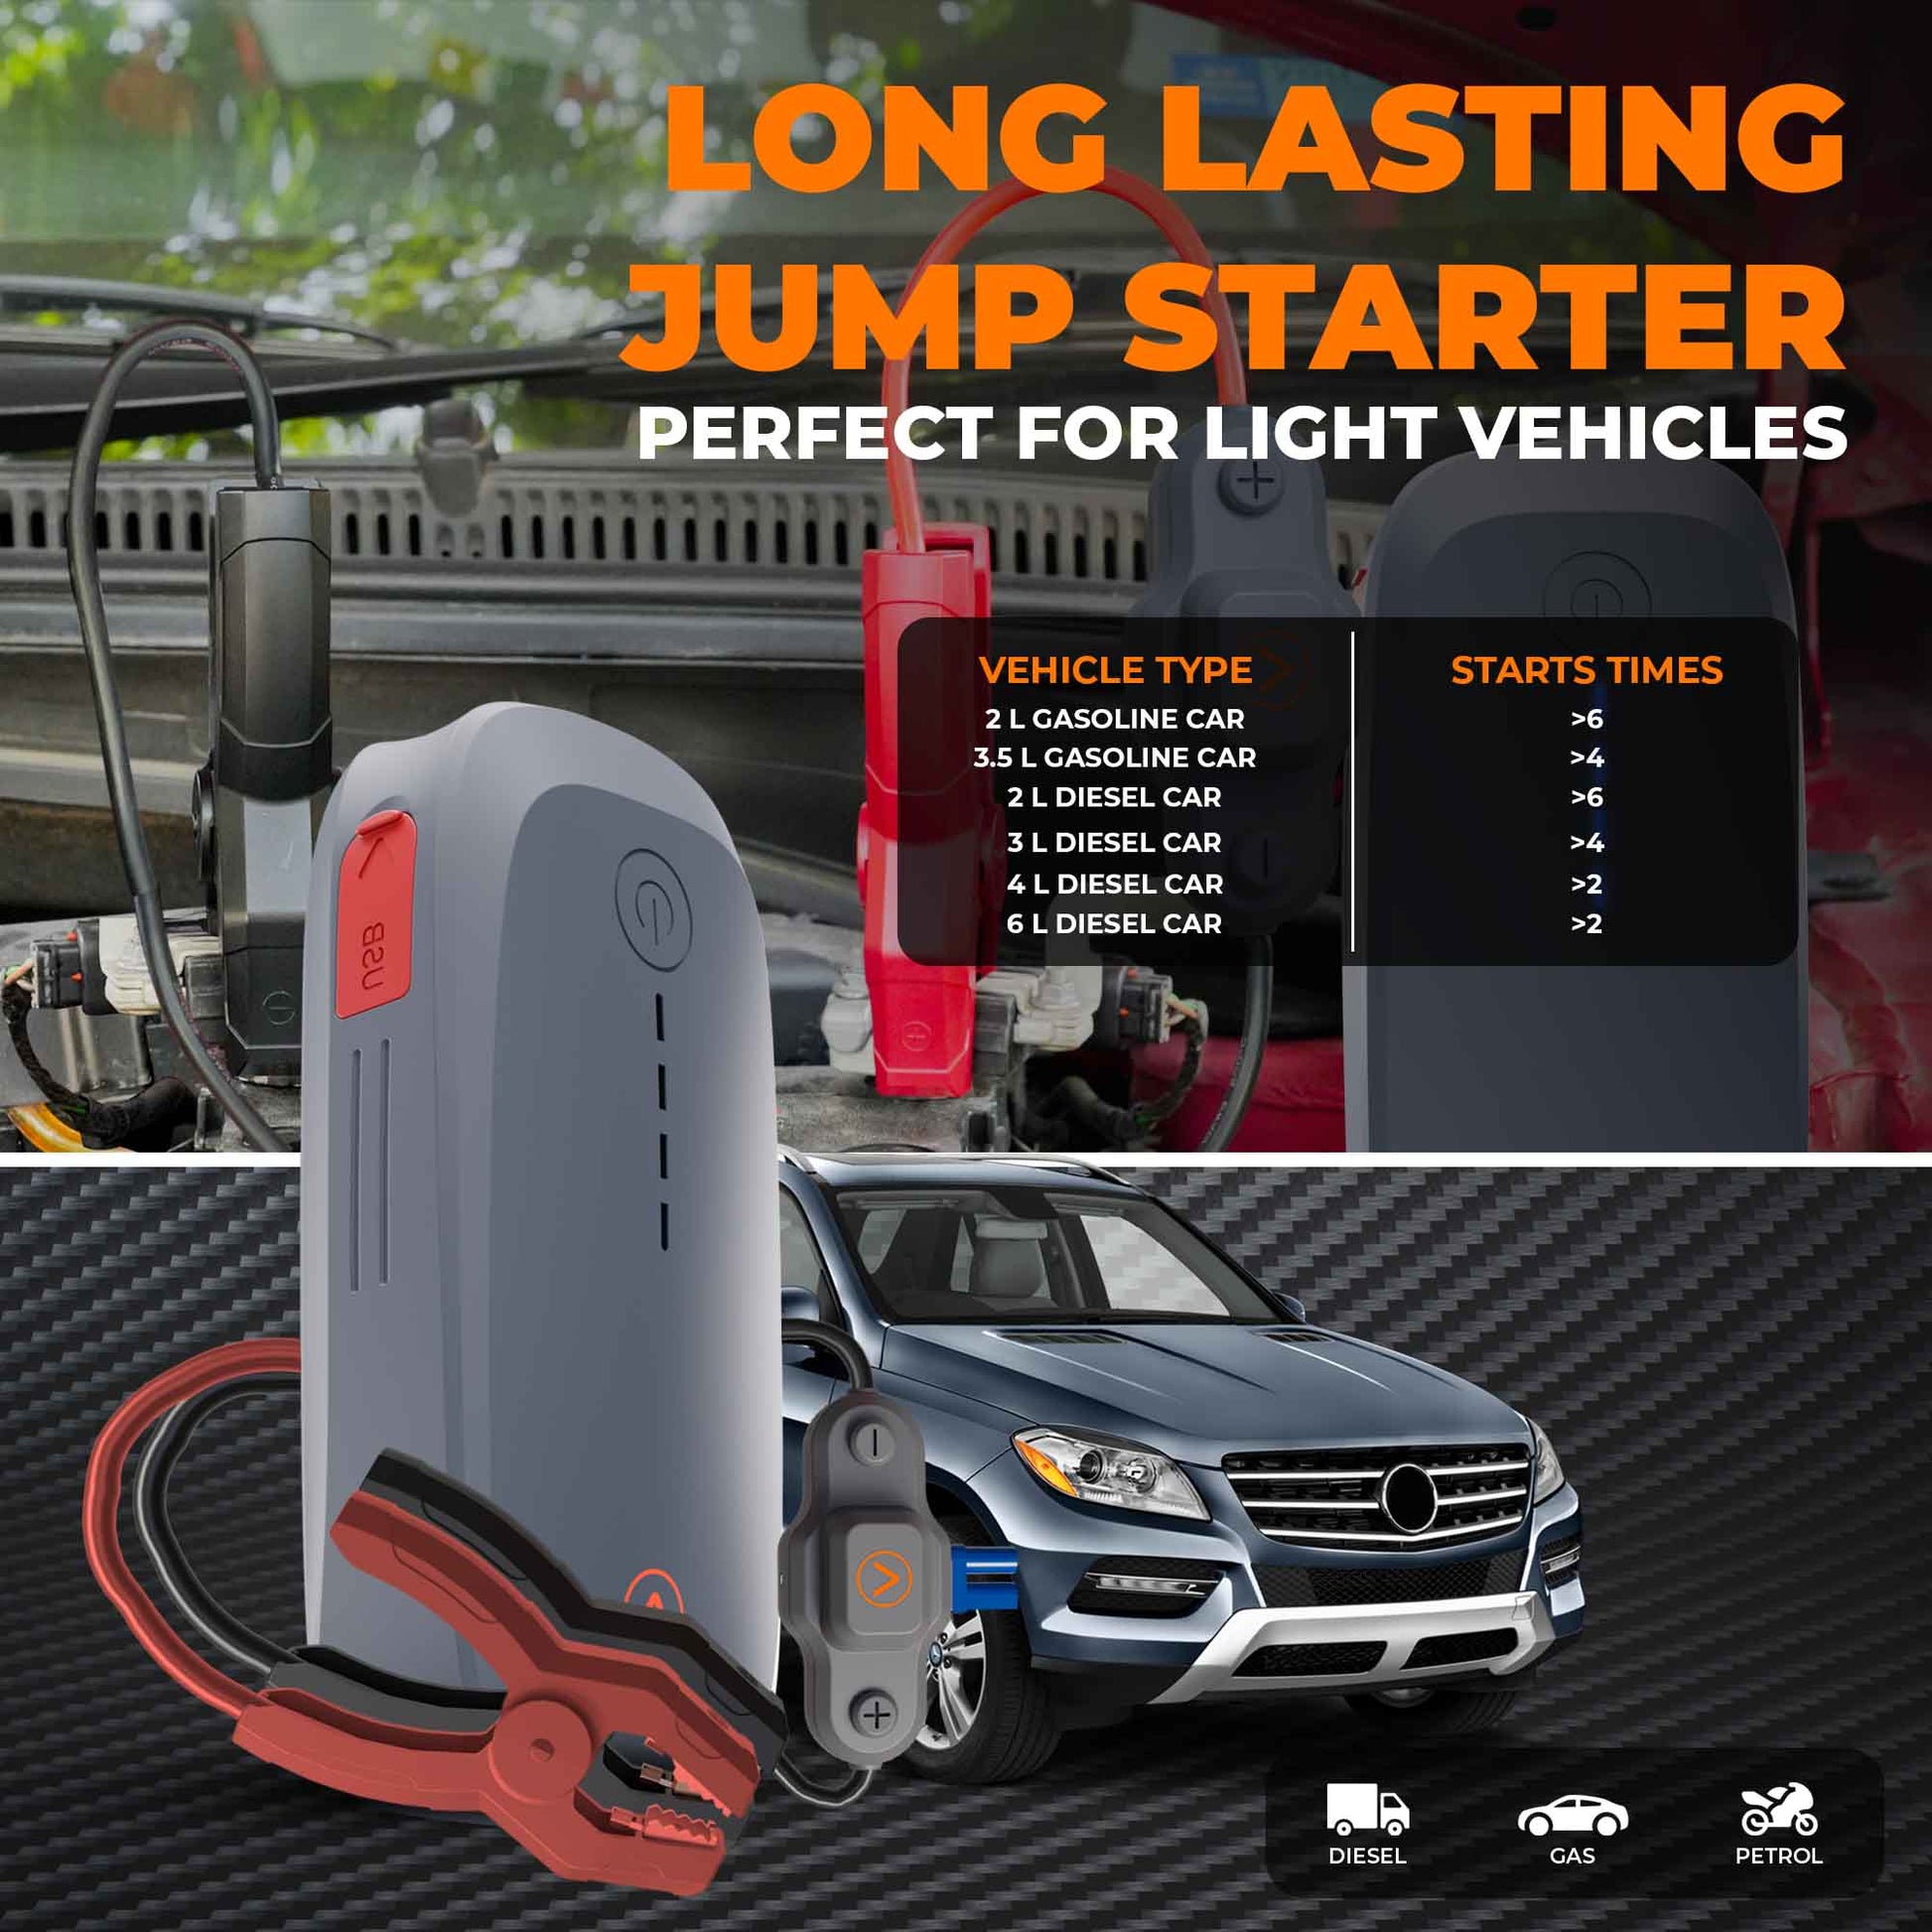 JCBL ACCESSORIES Young Guns Road Side Assistant 16,000mAh 5-in-1 Kit, Combo of Vacuum Cleaner, Tyre inflator, Pressure Washer, Jump Starter and SOS Light(16 Caliber) | | "4 A | : “LONG LASTING A i . A v nd JUMP STARTER - 2-5 — | %. PERFECT FOR LIGHT VEHICLES Lym mmmmmn FET | -— BIT TEREST Ry | ee HE, J | EE Ee VEHICLE TYPE STARTS TIMES 2 L GASOLINE CAR >6 , 3.5L GASOLINE CAR >4  2L DIESEL CAR 6 |  3 L DIESEL CAR >4  0) Ci 4 L DIESEL CAR >2 |  \U ) 6 L DIESEL CAR >2 |  a